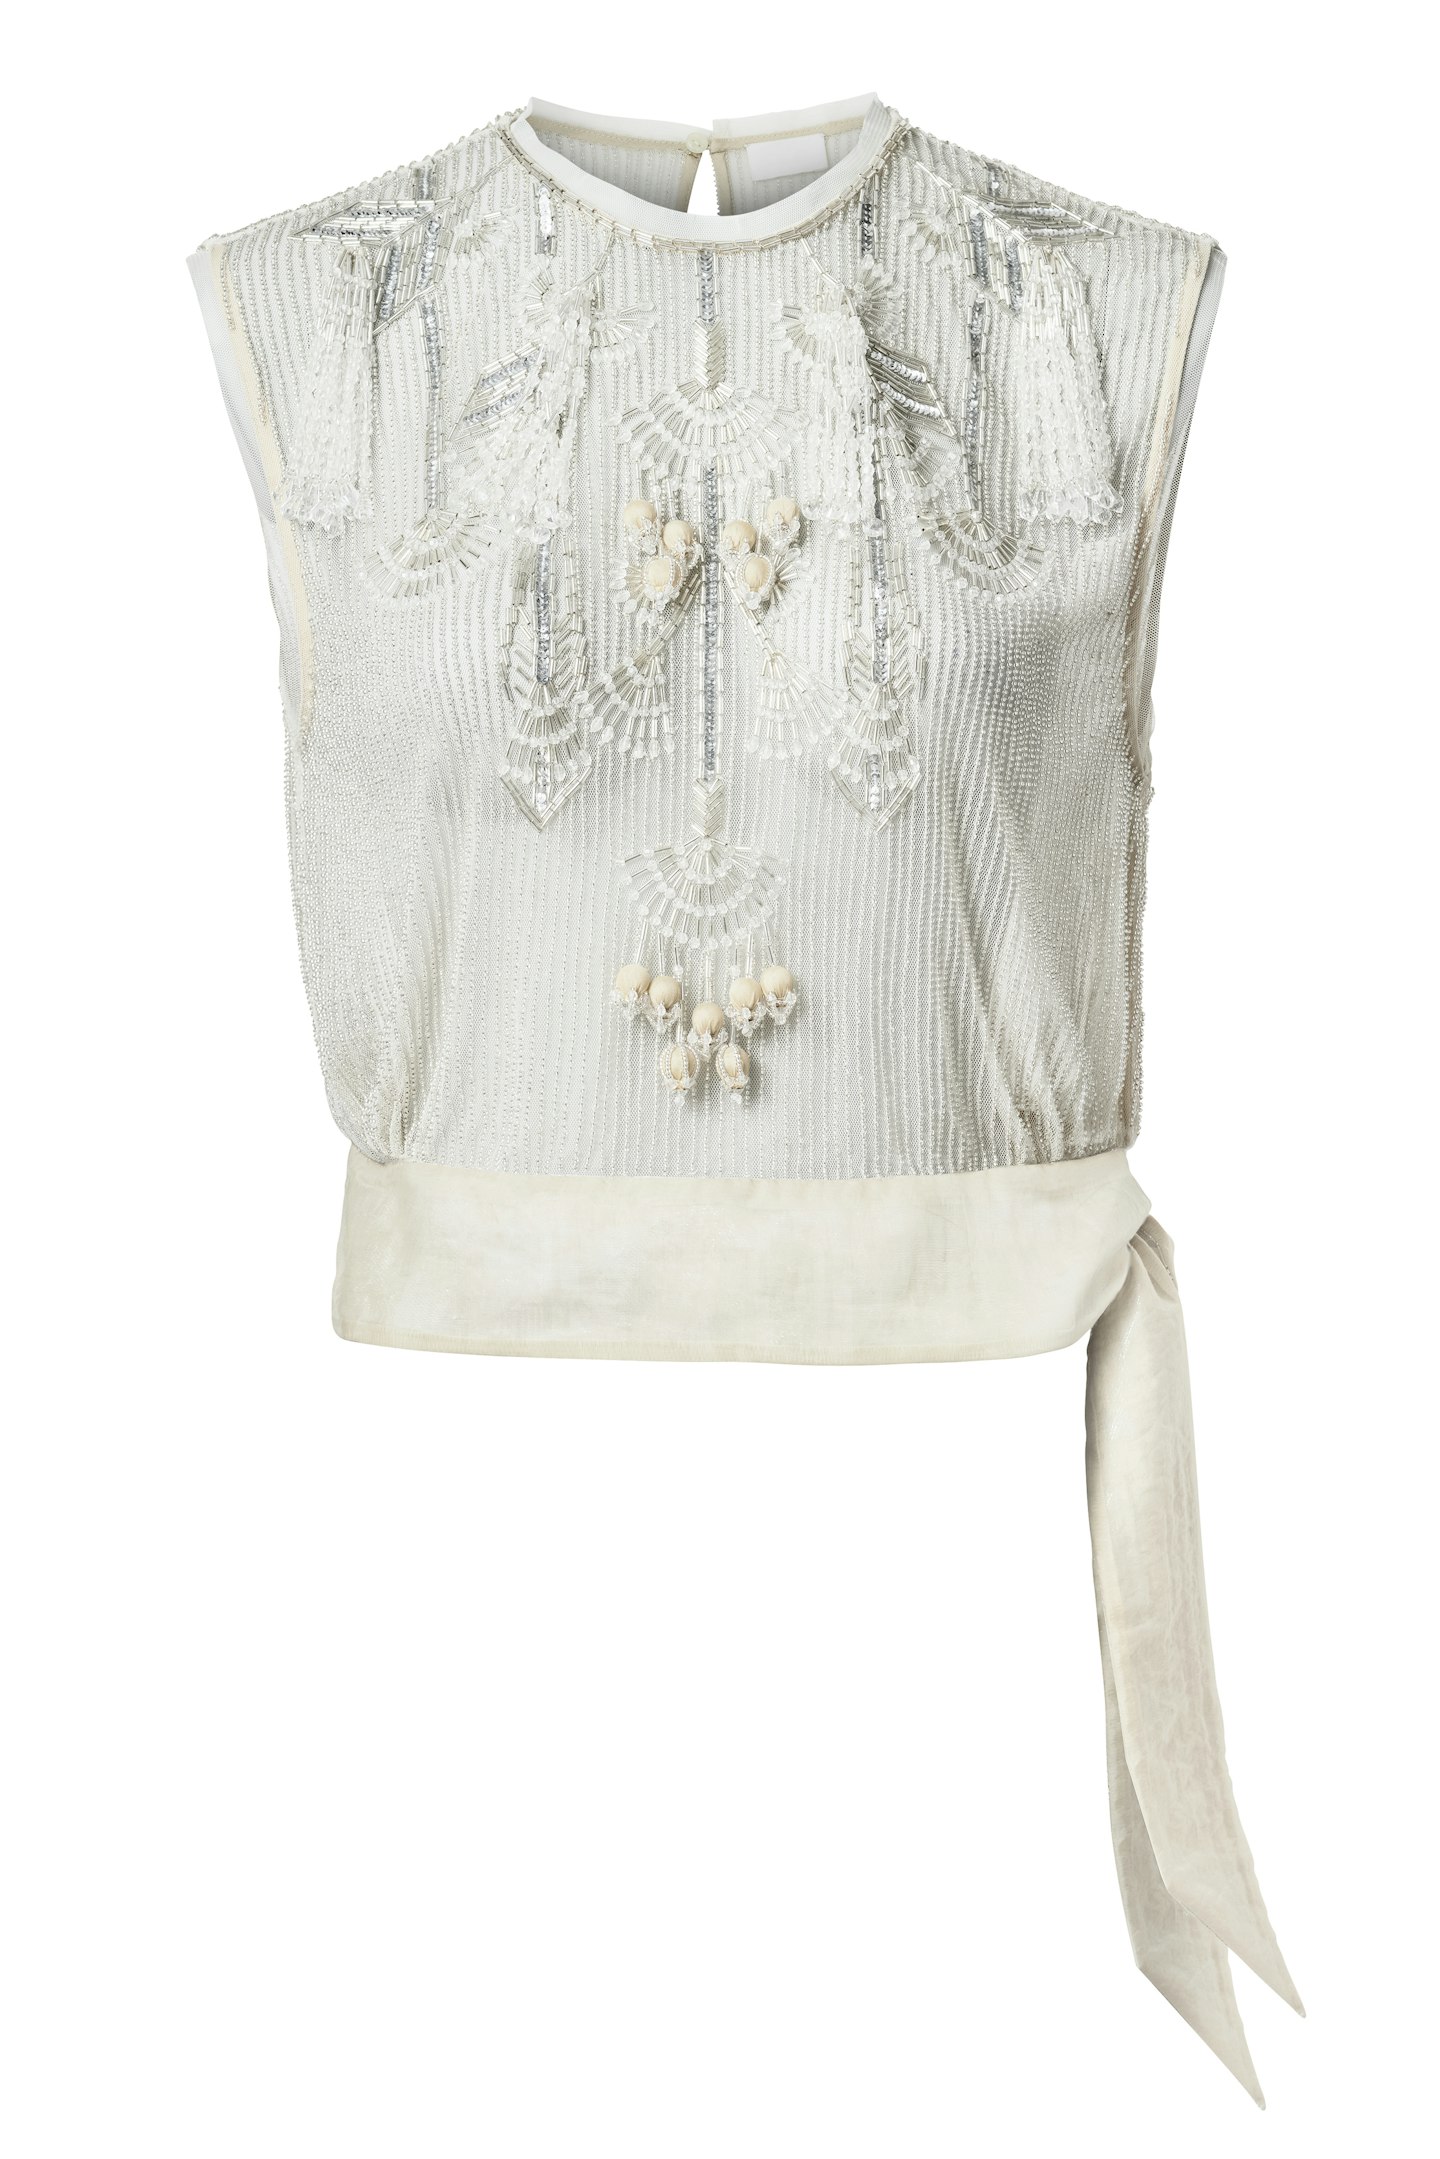 Bead Embroidered Top, £119.99